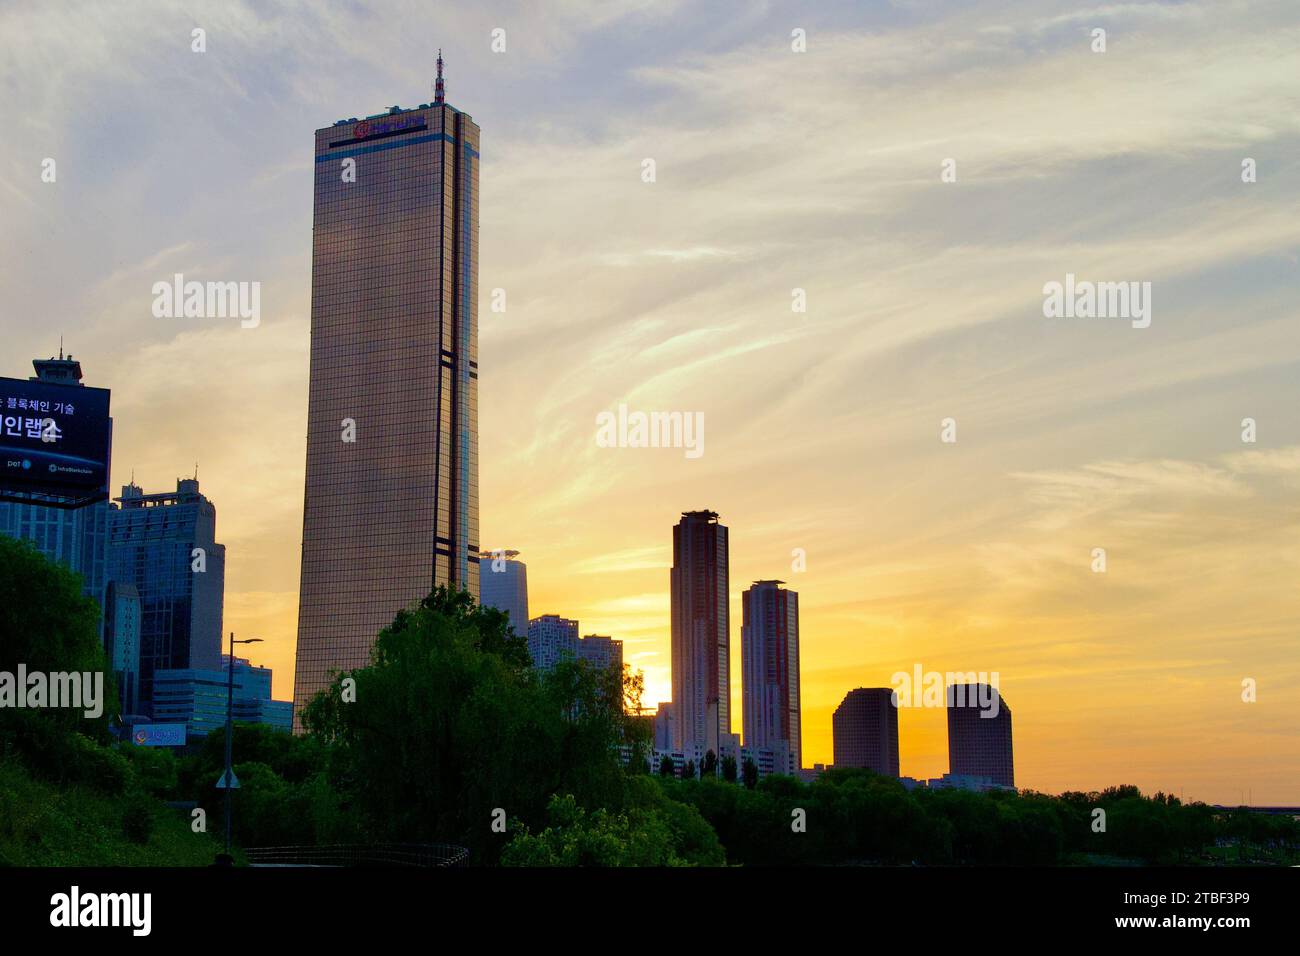 A picture of the 63 Building in Yeouido Hangang Park in Seoul, South Korea. Stock Photo